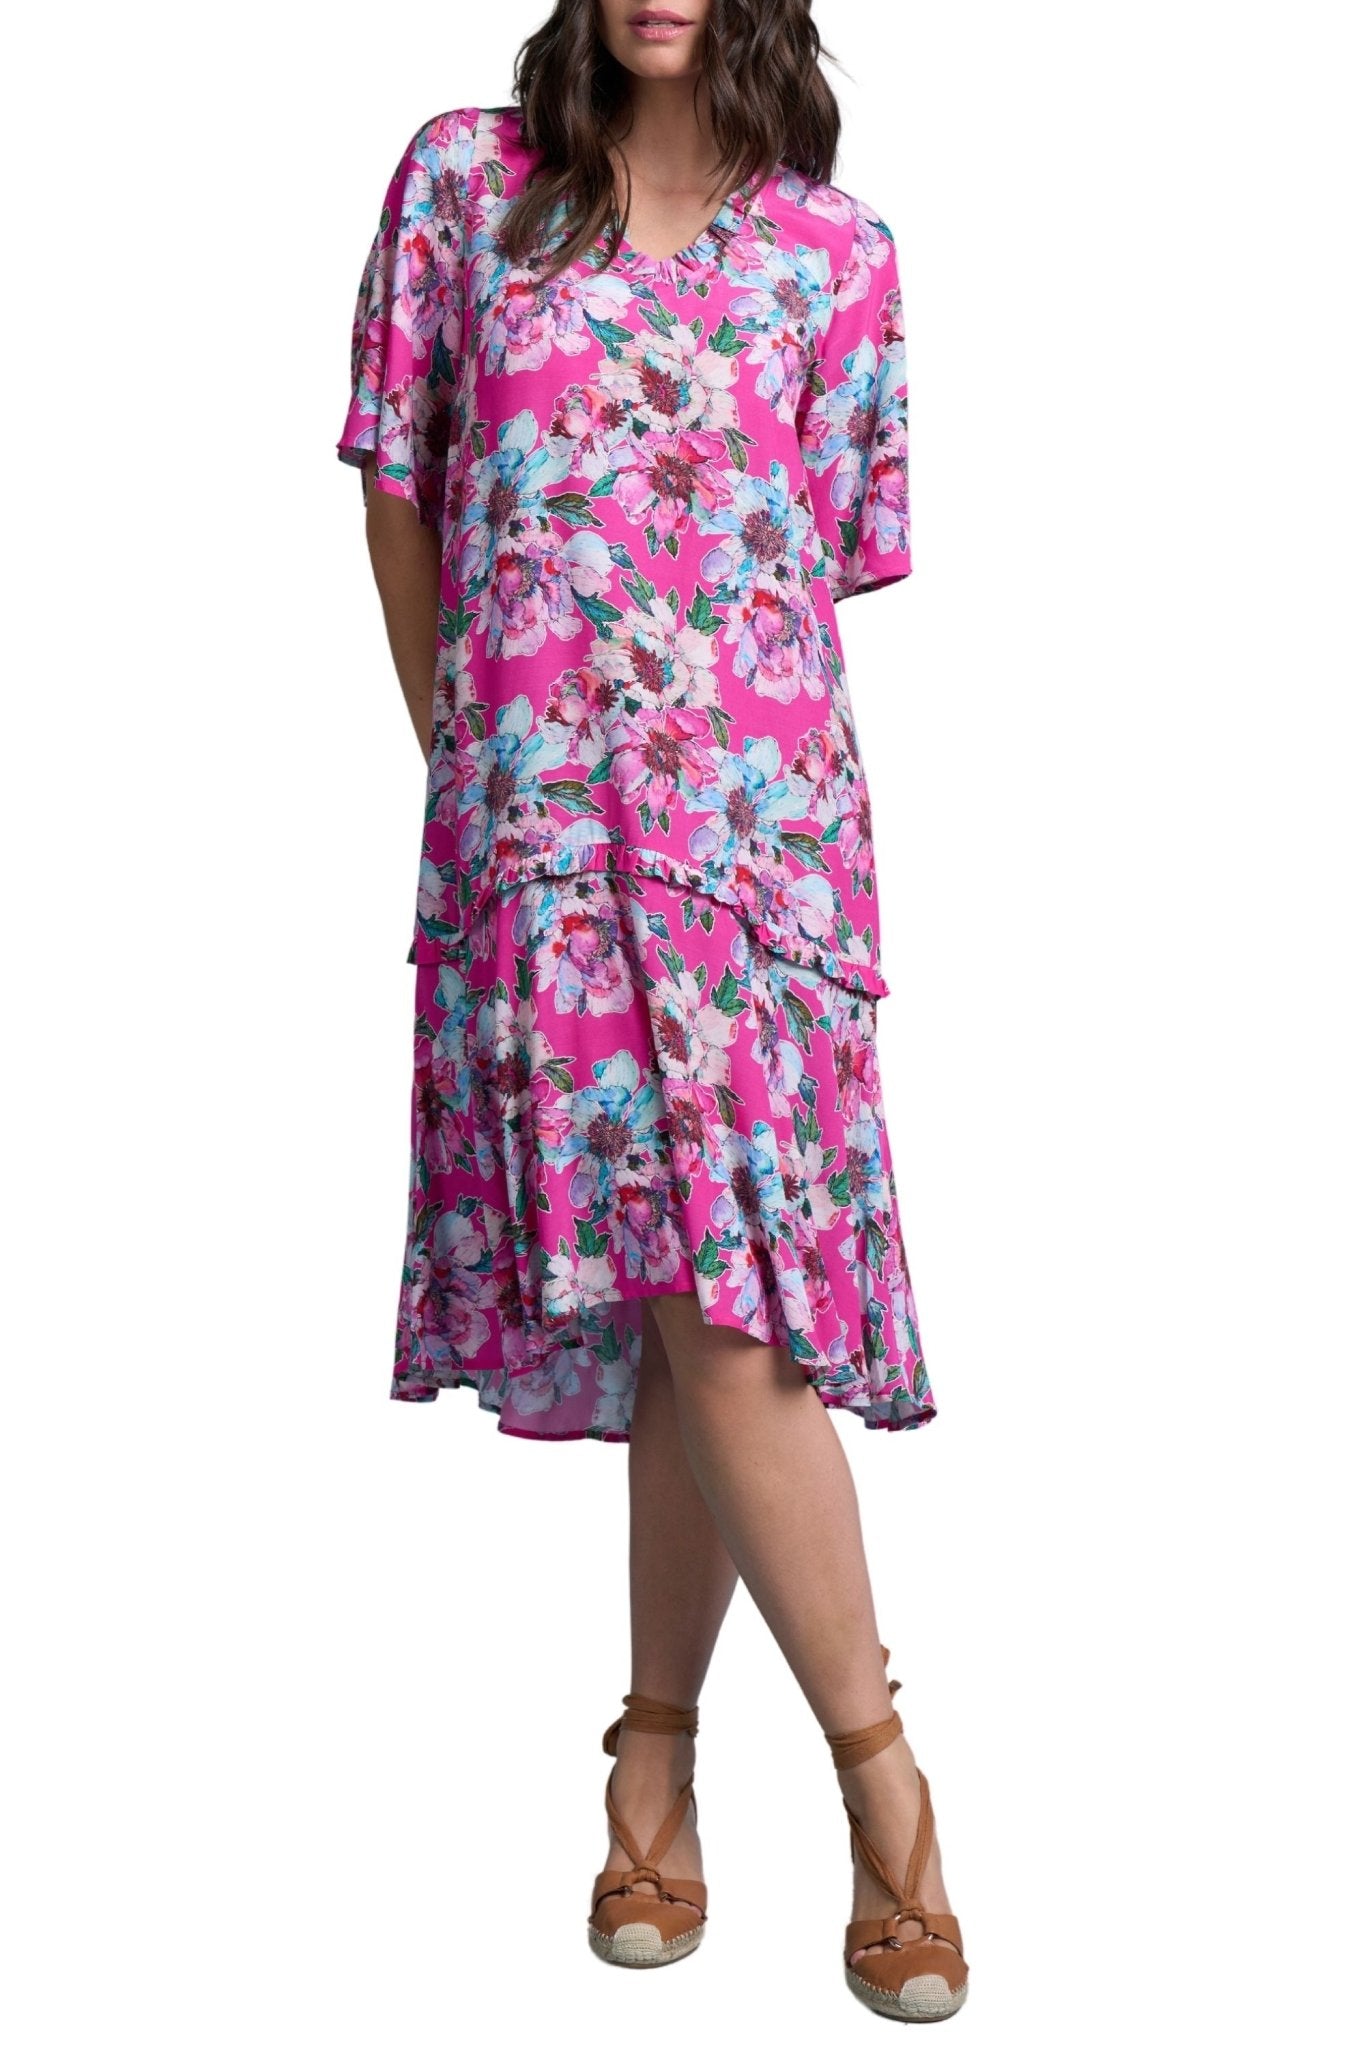 MADLY-SWEETLY-ASHLEY-BLOOM-DRESS-MS1116